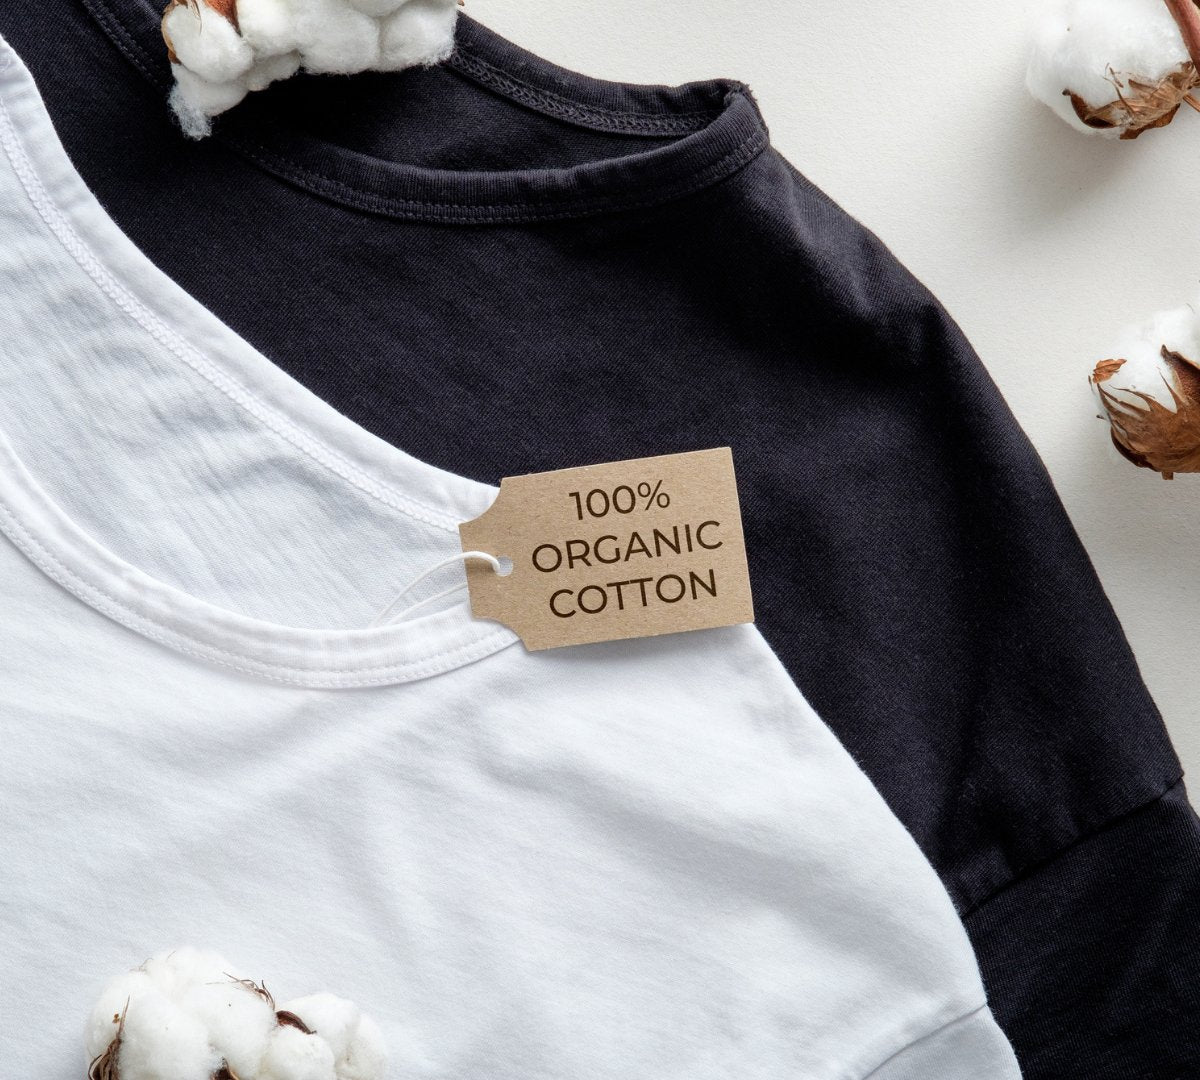 What’s Organic Cotton and Why Does It Matter for My T-Shirts? - Threadsy